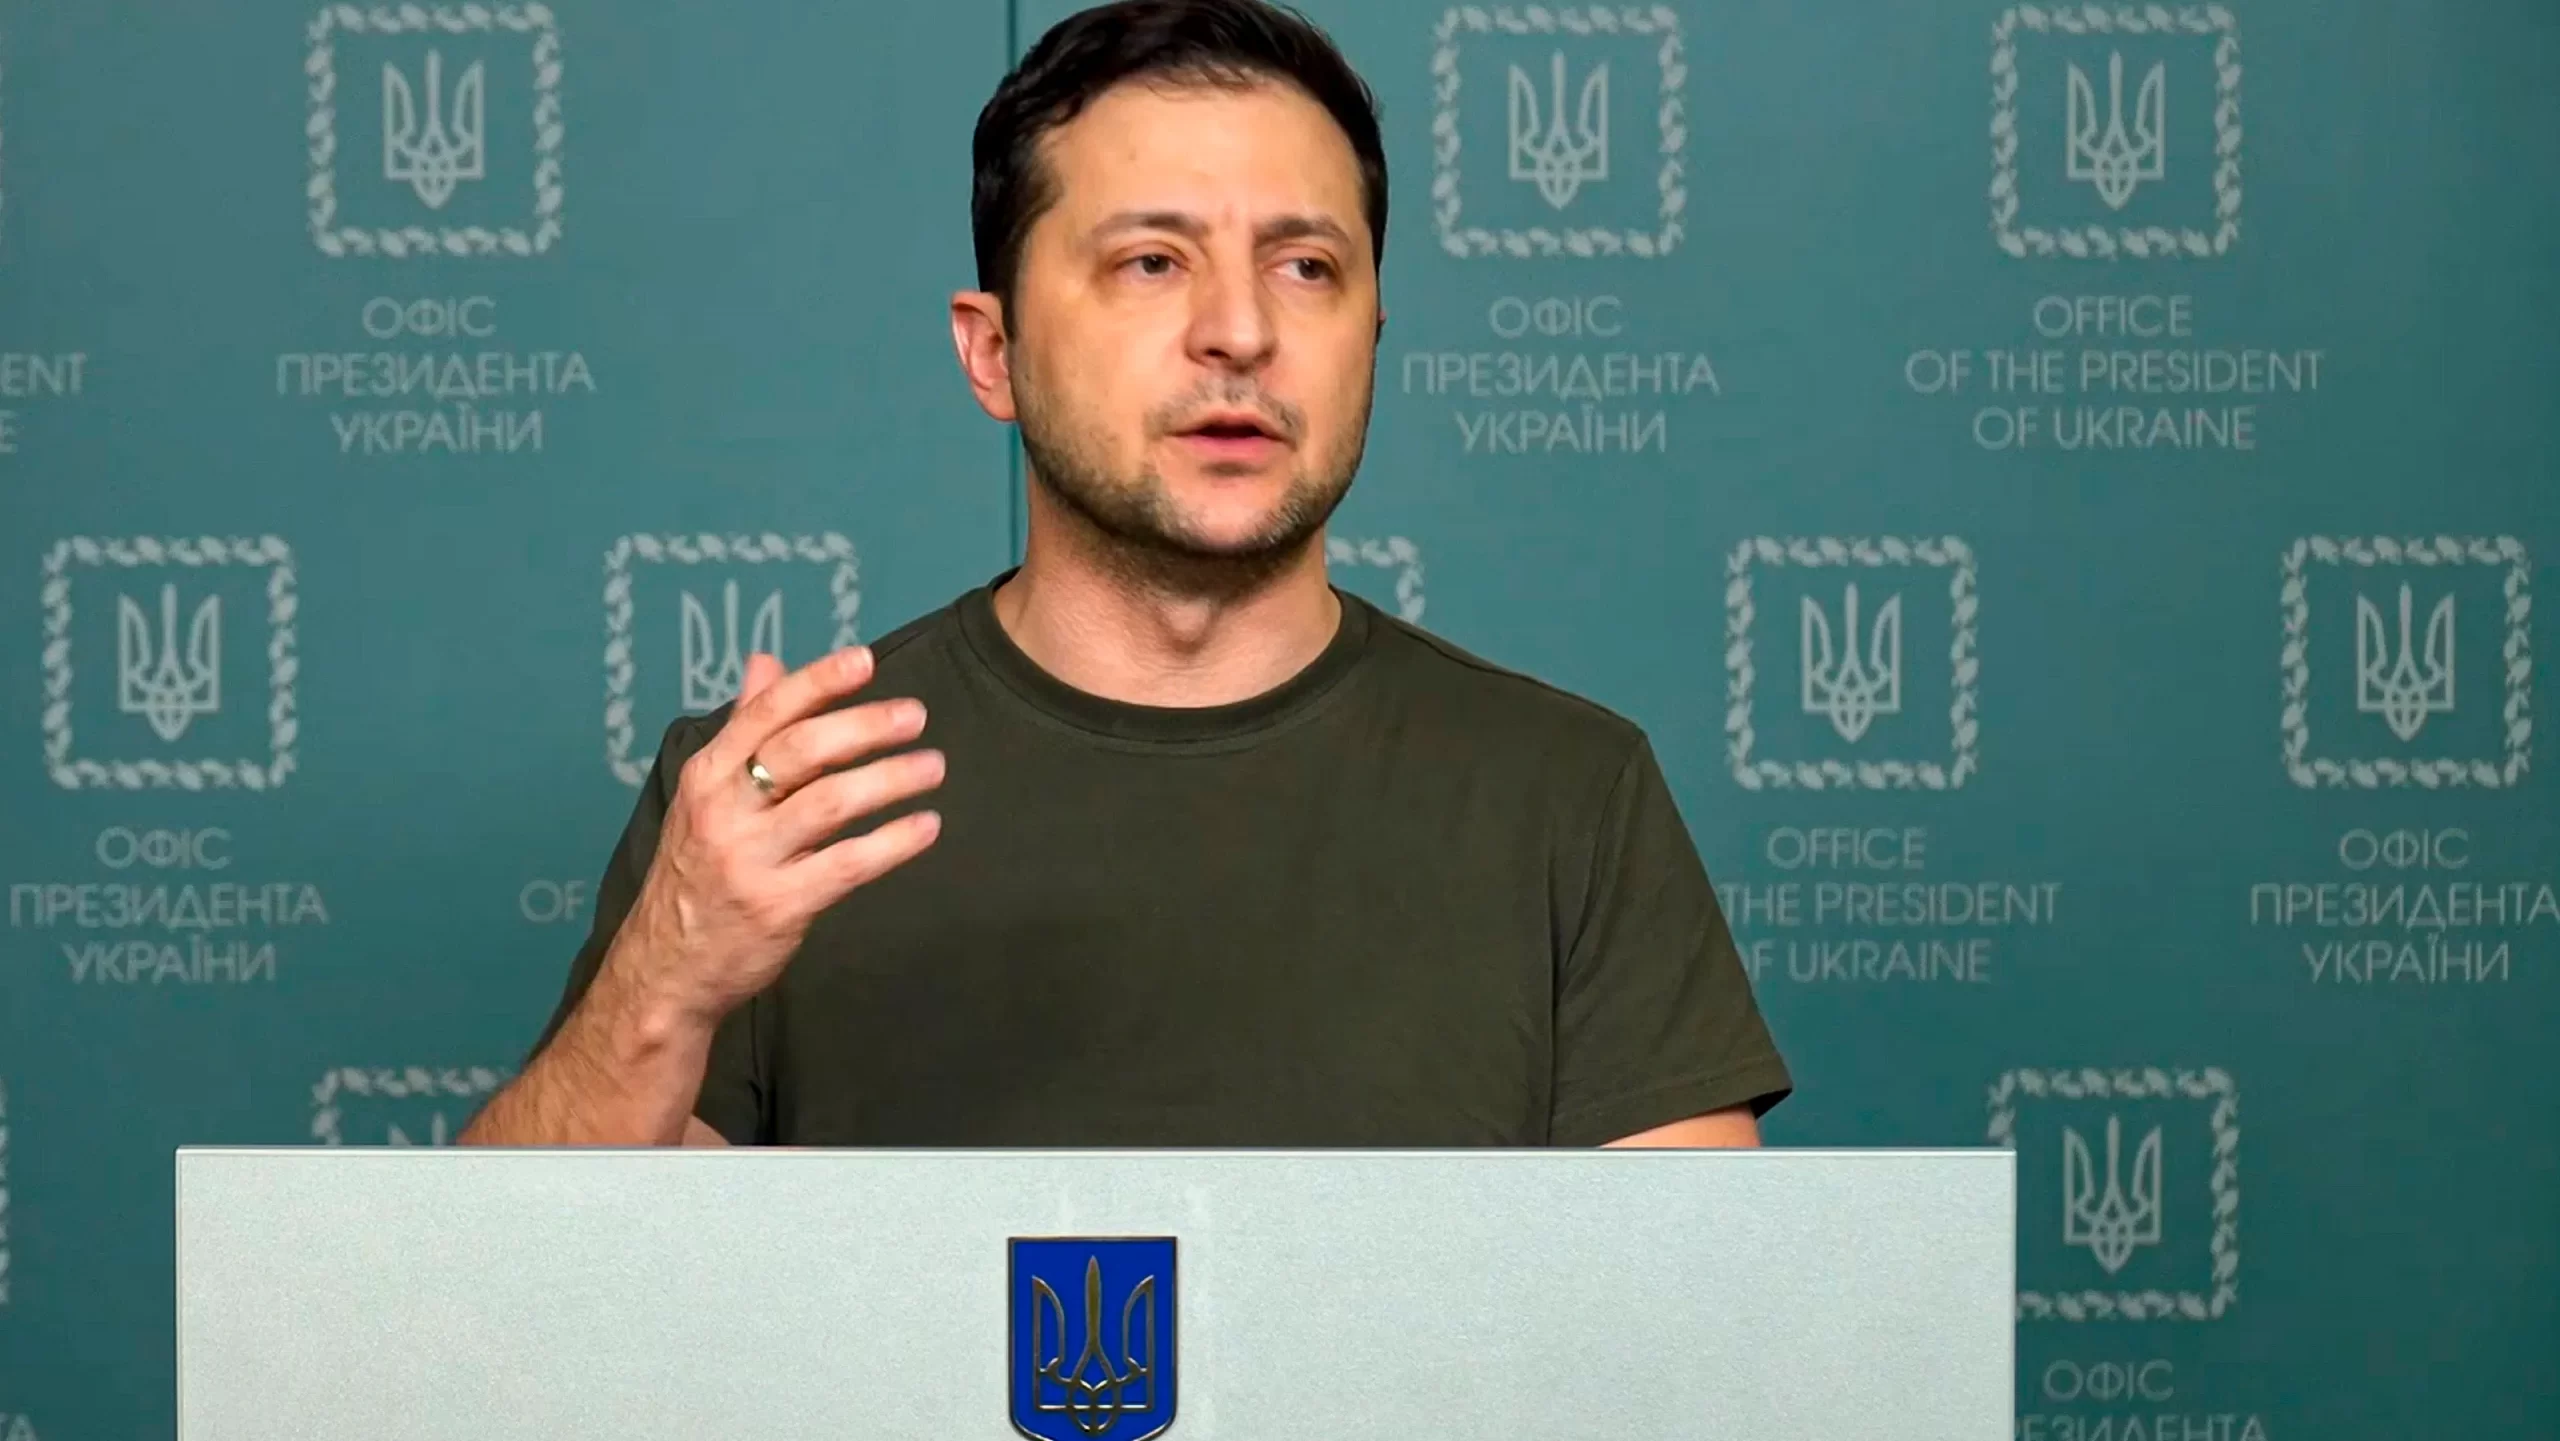 What were some of the early challenges faced by Zelensky